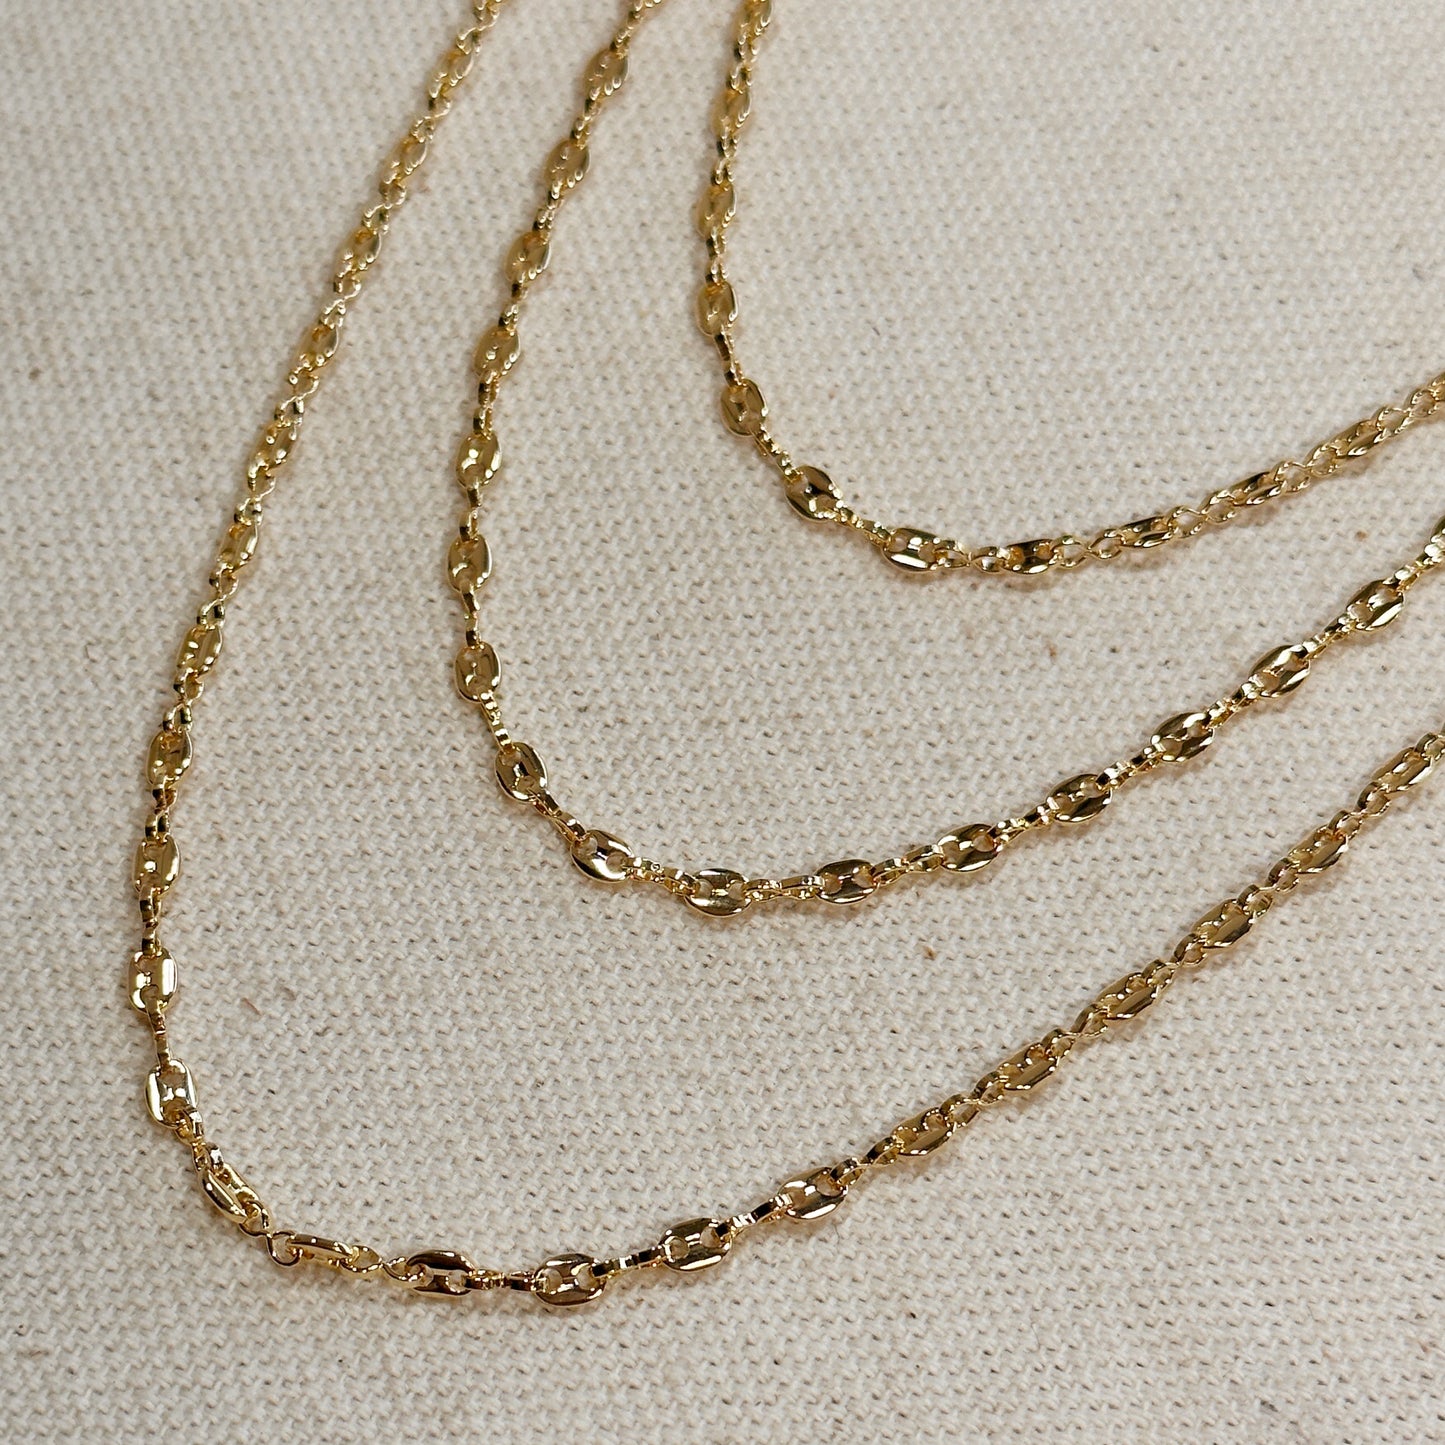 18k Gold Filled 3mm Mini Puffy Links Chain